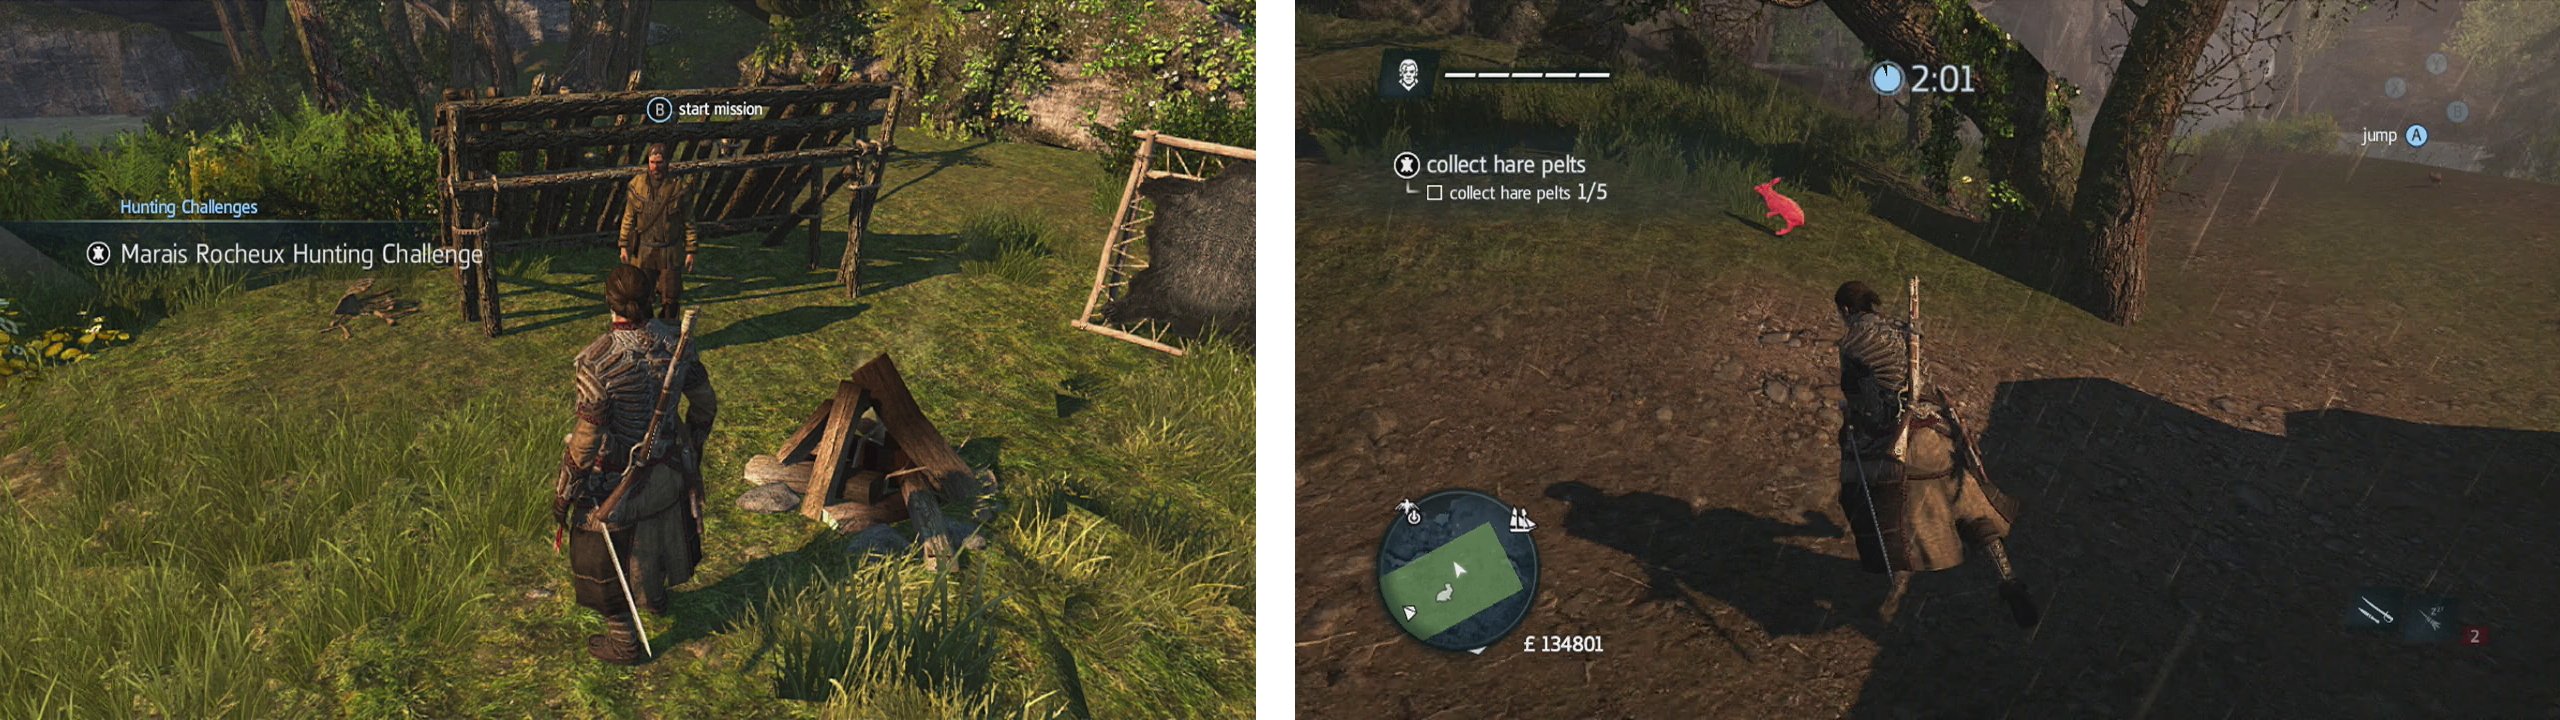 Approach the hunter to start the challenge (left). Chase after and use your hidden blades to kill the hares (right).